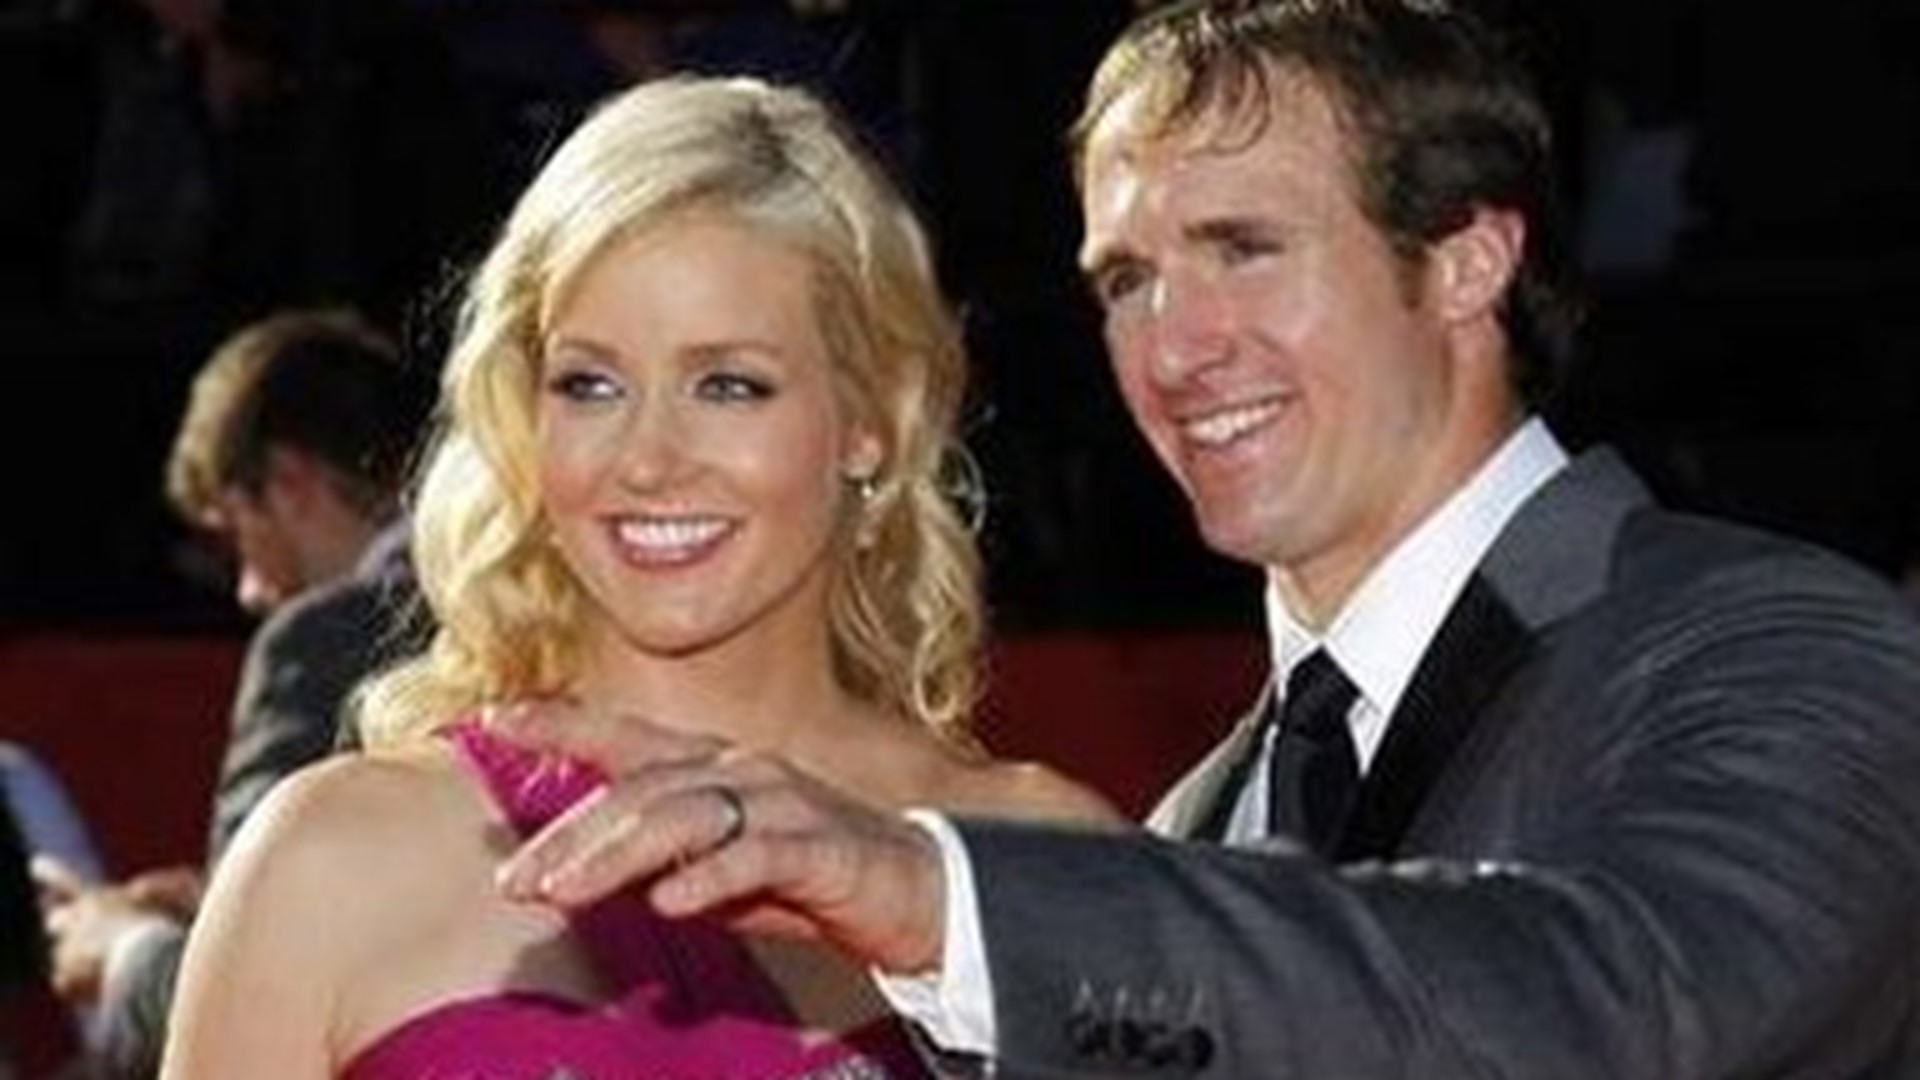 ‘WE ARE THE PROBLEM’: Drew Brees’ Wife Claims ‘White America’ Is ‘Not ...